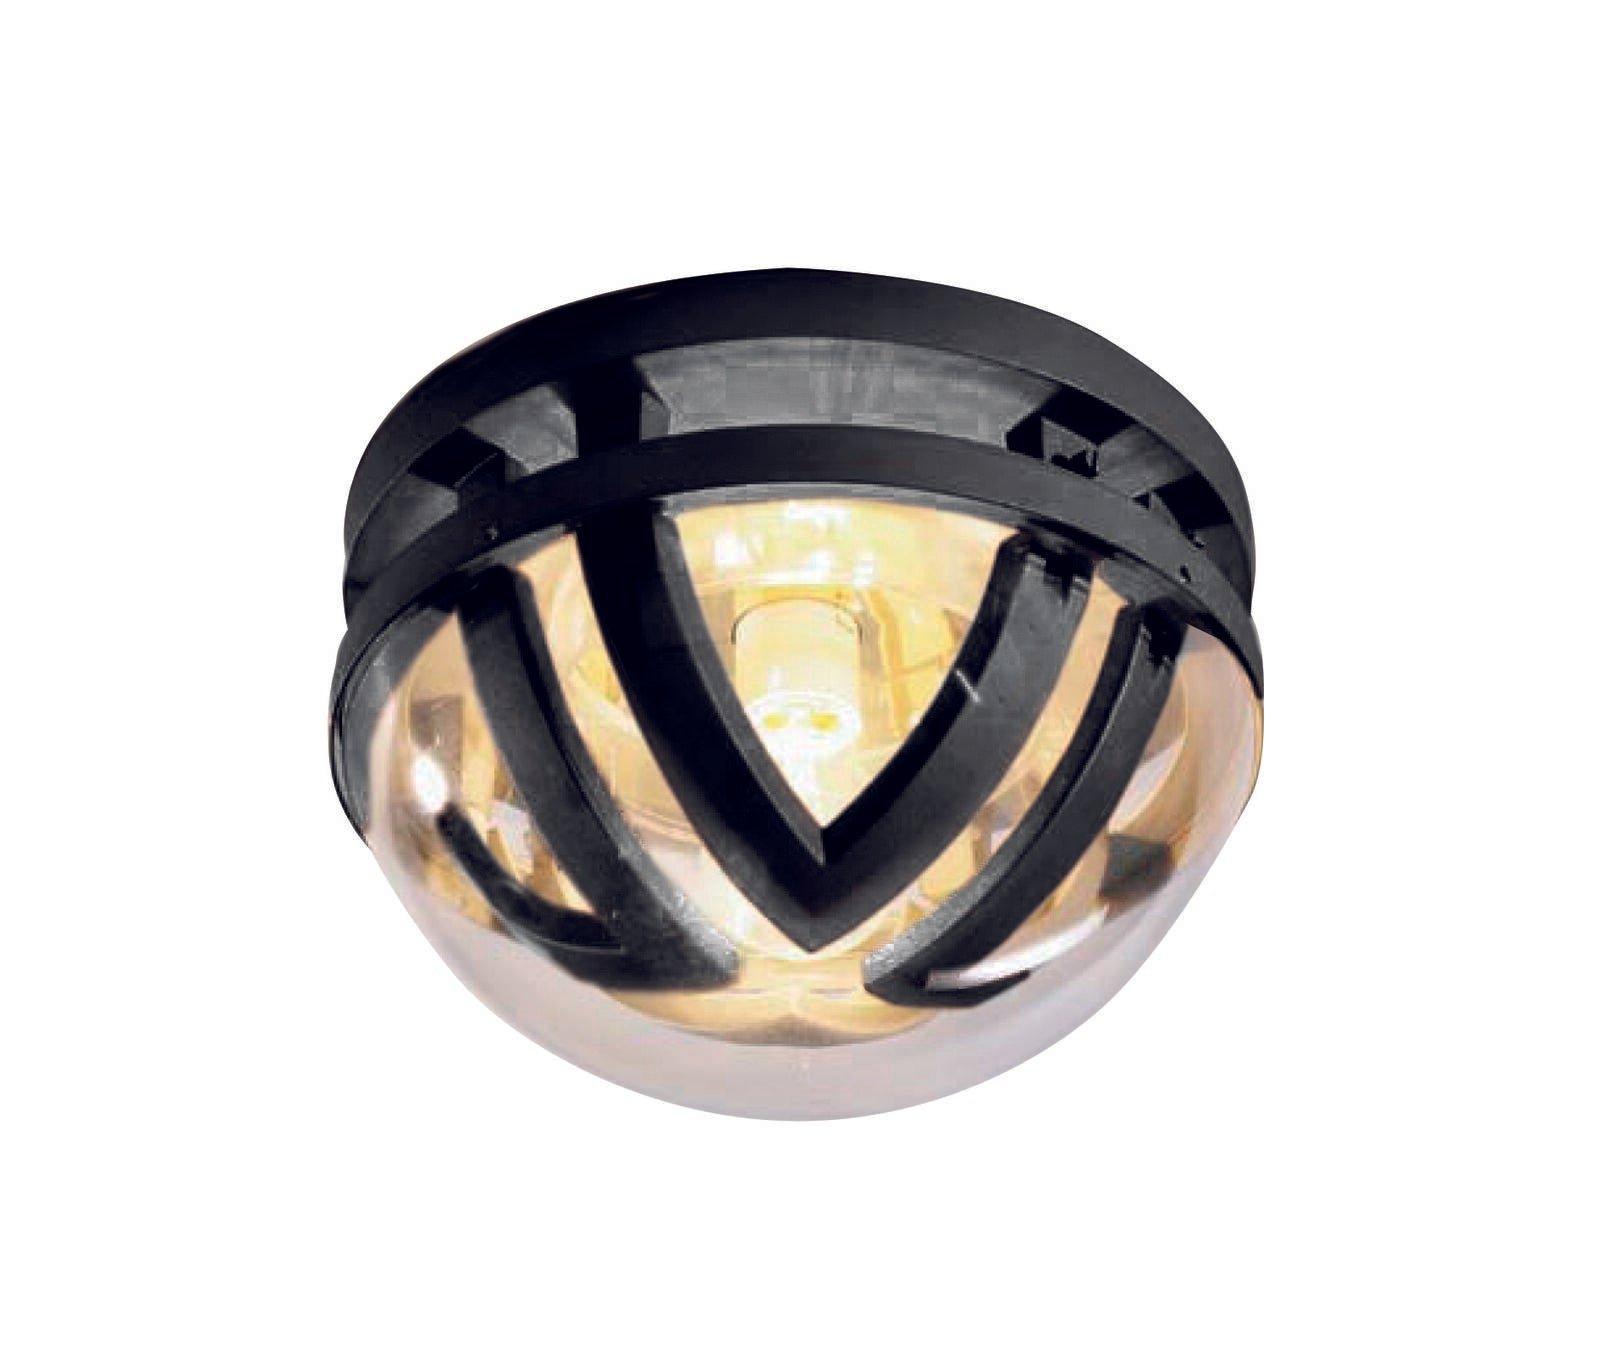 Outdoor IP54 Wall Light Graphite LED E27 100W d01054